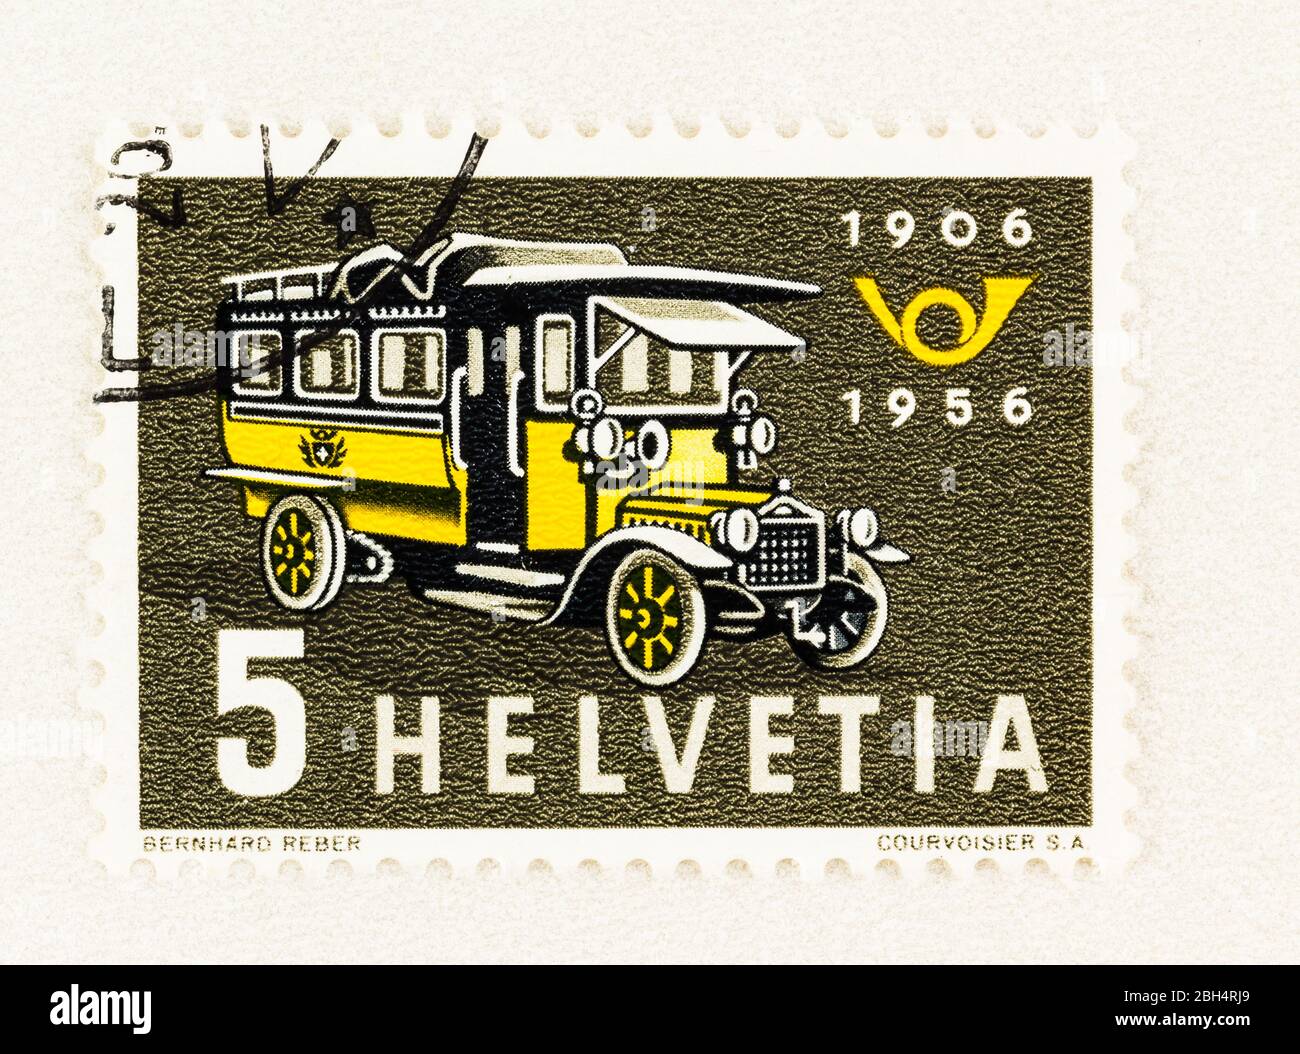 SEATTLE WASHINGTON - April 18, 2020: 1956 Swiss stamp commemorating 50th anniversary of Postal Bus service, featuring first bus of 1906 and posthorn Stock Photo